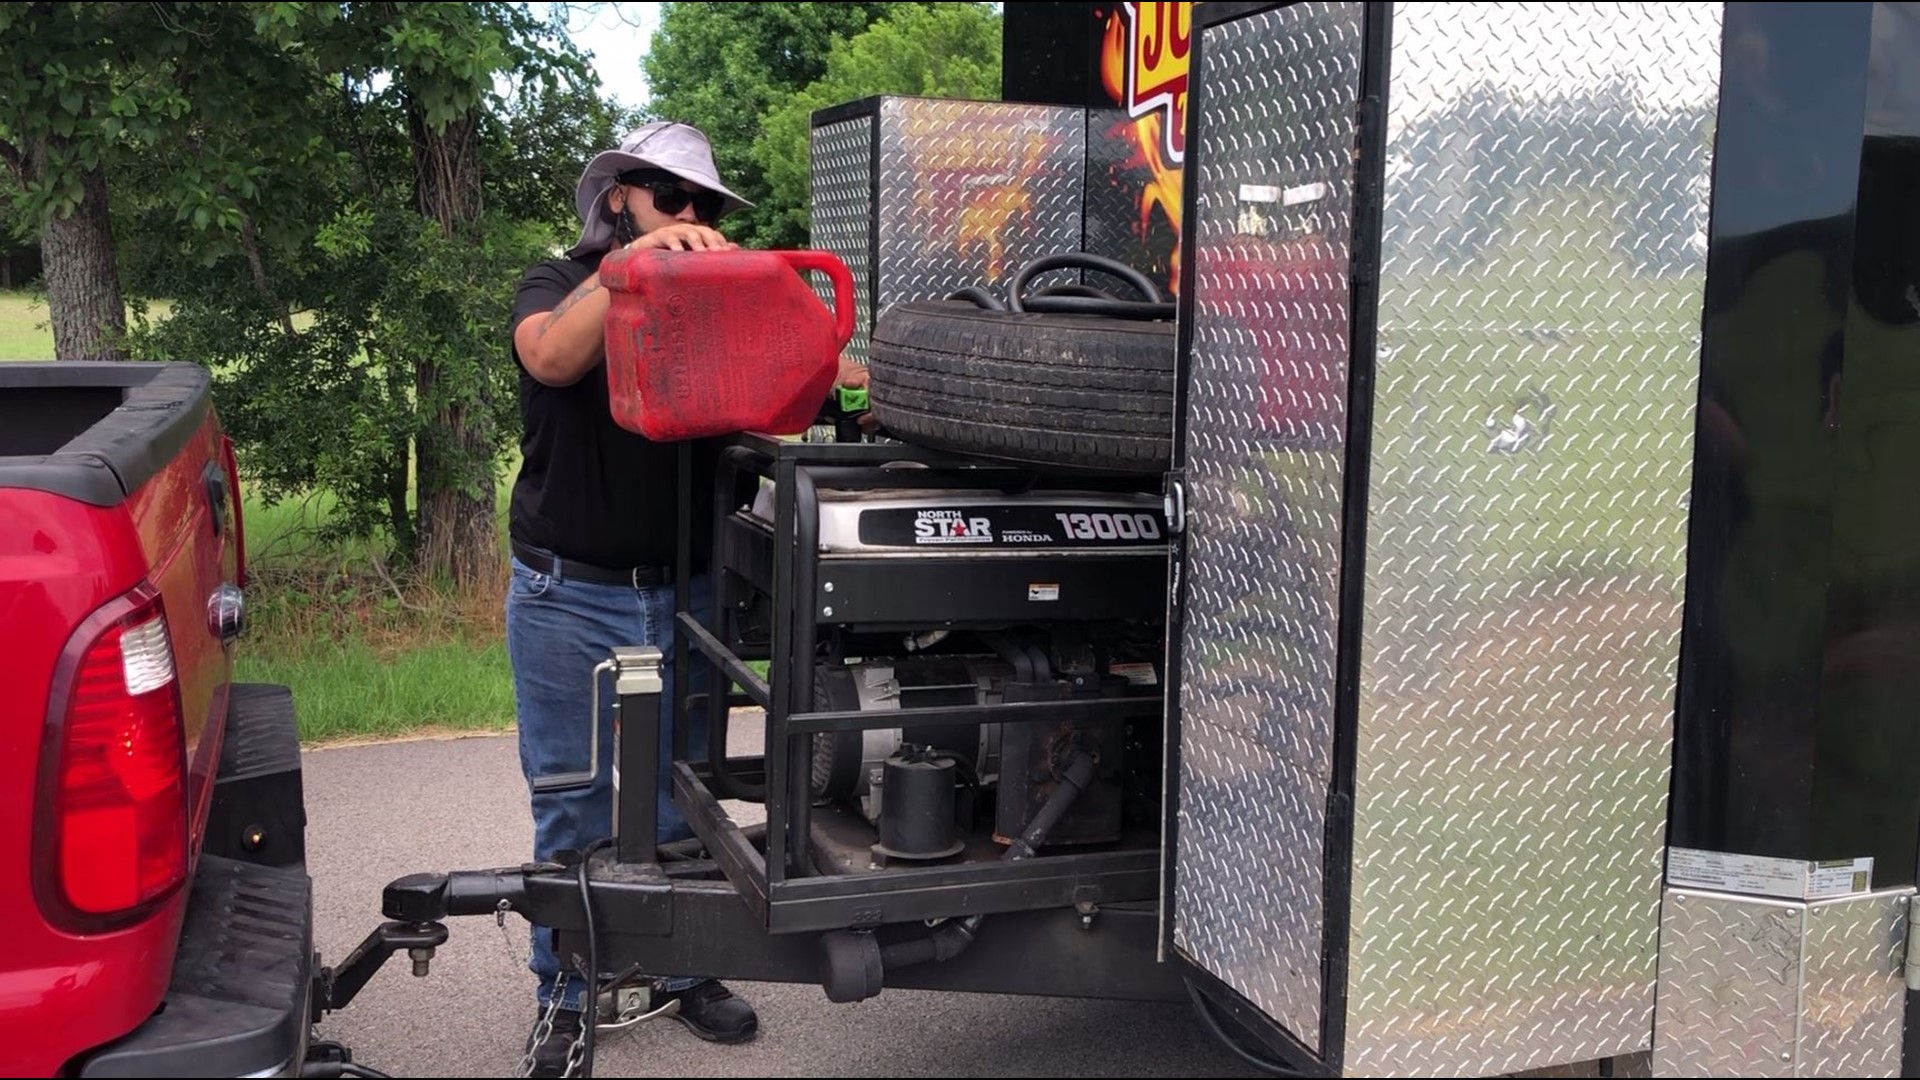 With the high cost of food, restaurant supplies, and now gas.. the service industry on wheels are finding ways to spread out the cost.